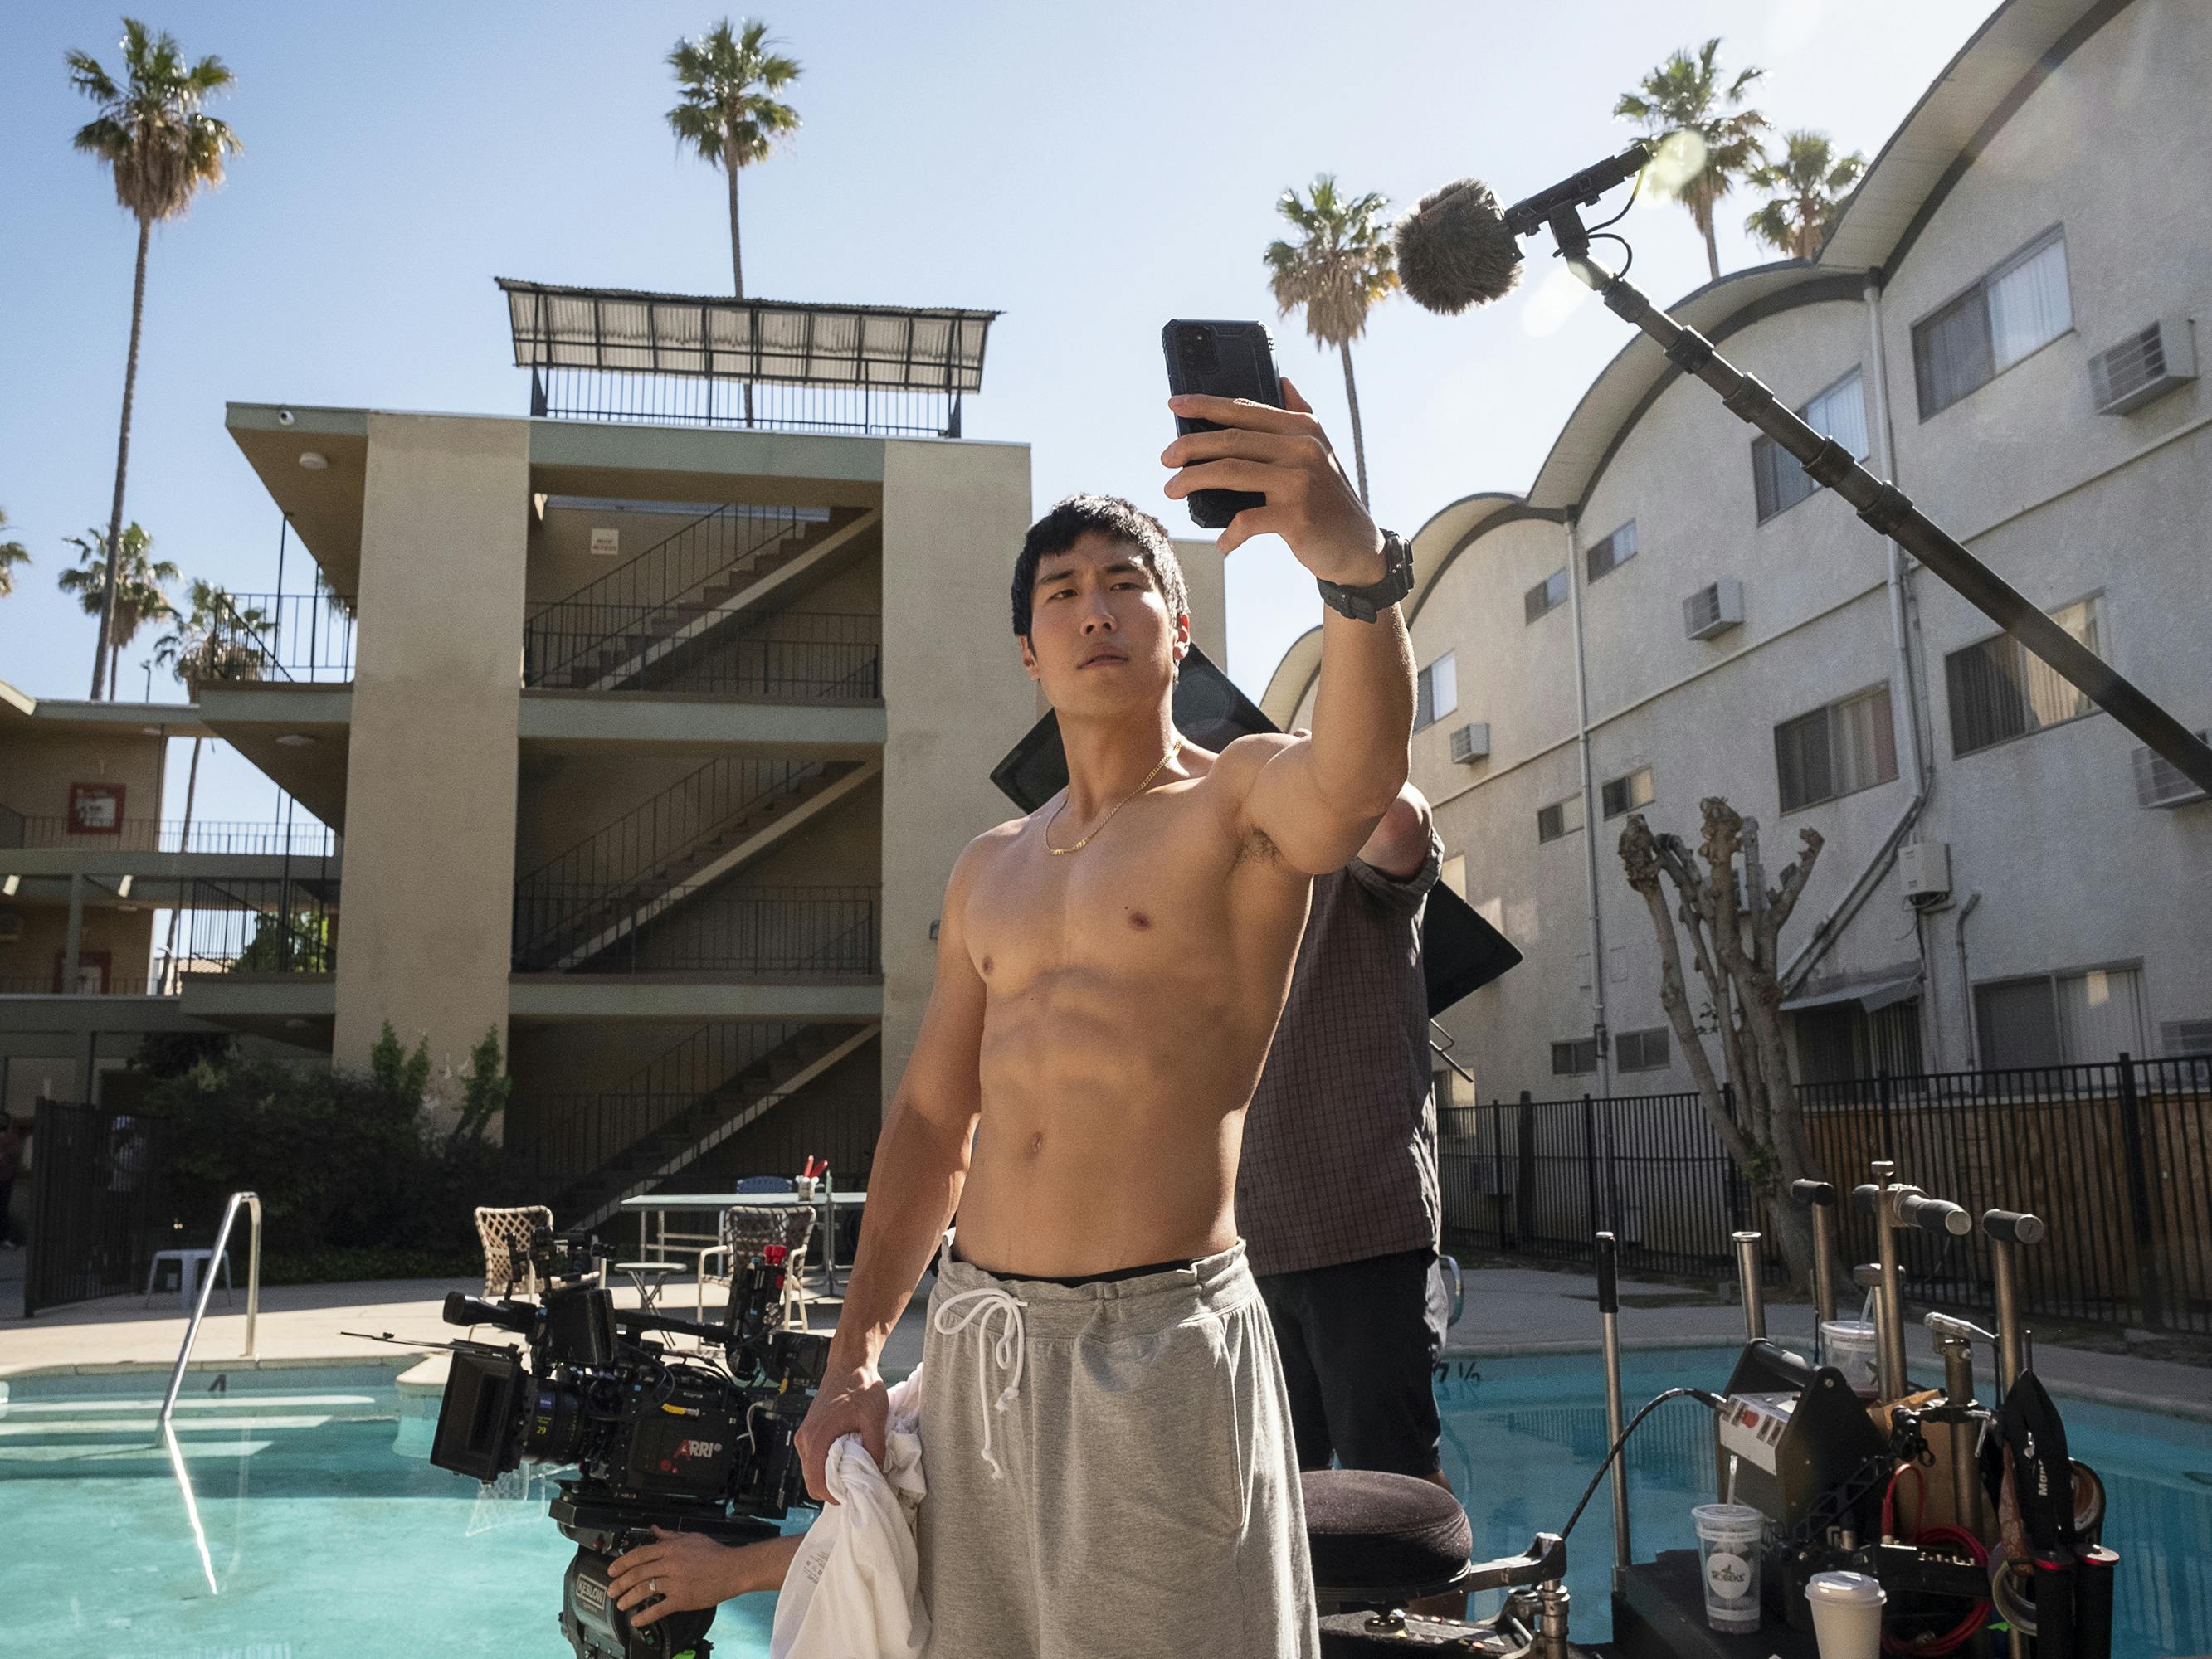 Young Mazino takes a selfie poolside in this behind-the-scenes shot. The sun shines from behind his character’s beige apartment building, illuminating his muscles and rows of abs nicely. 